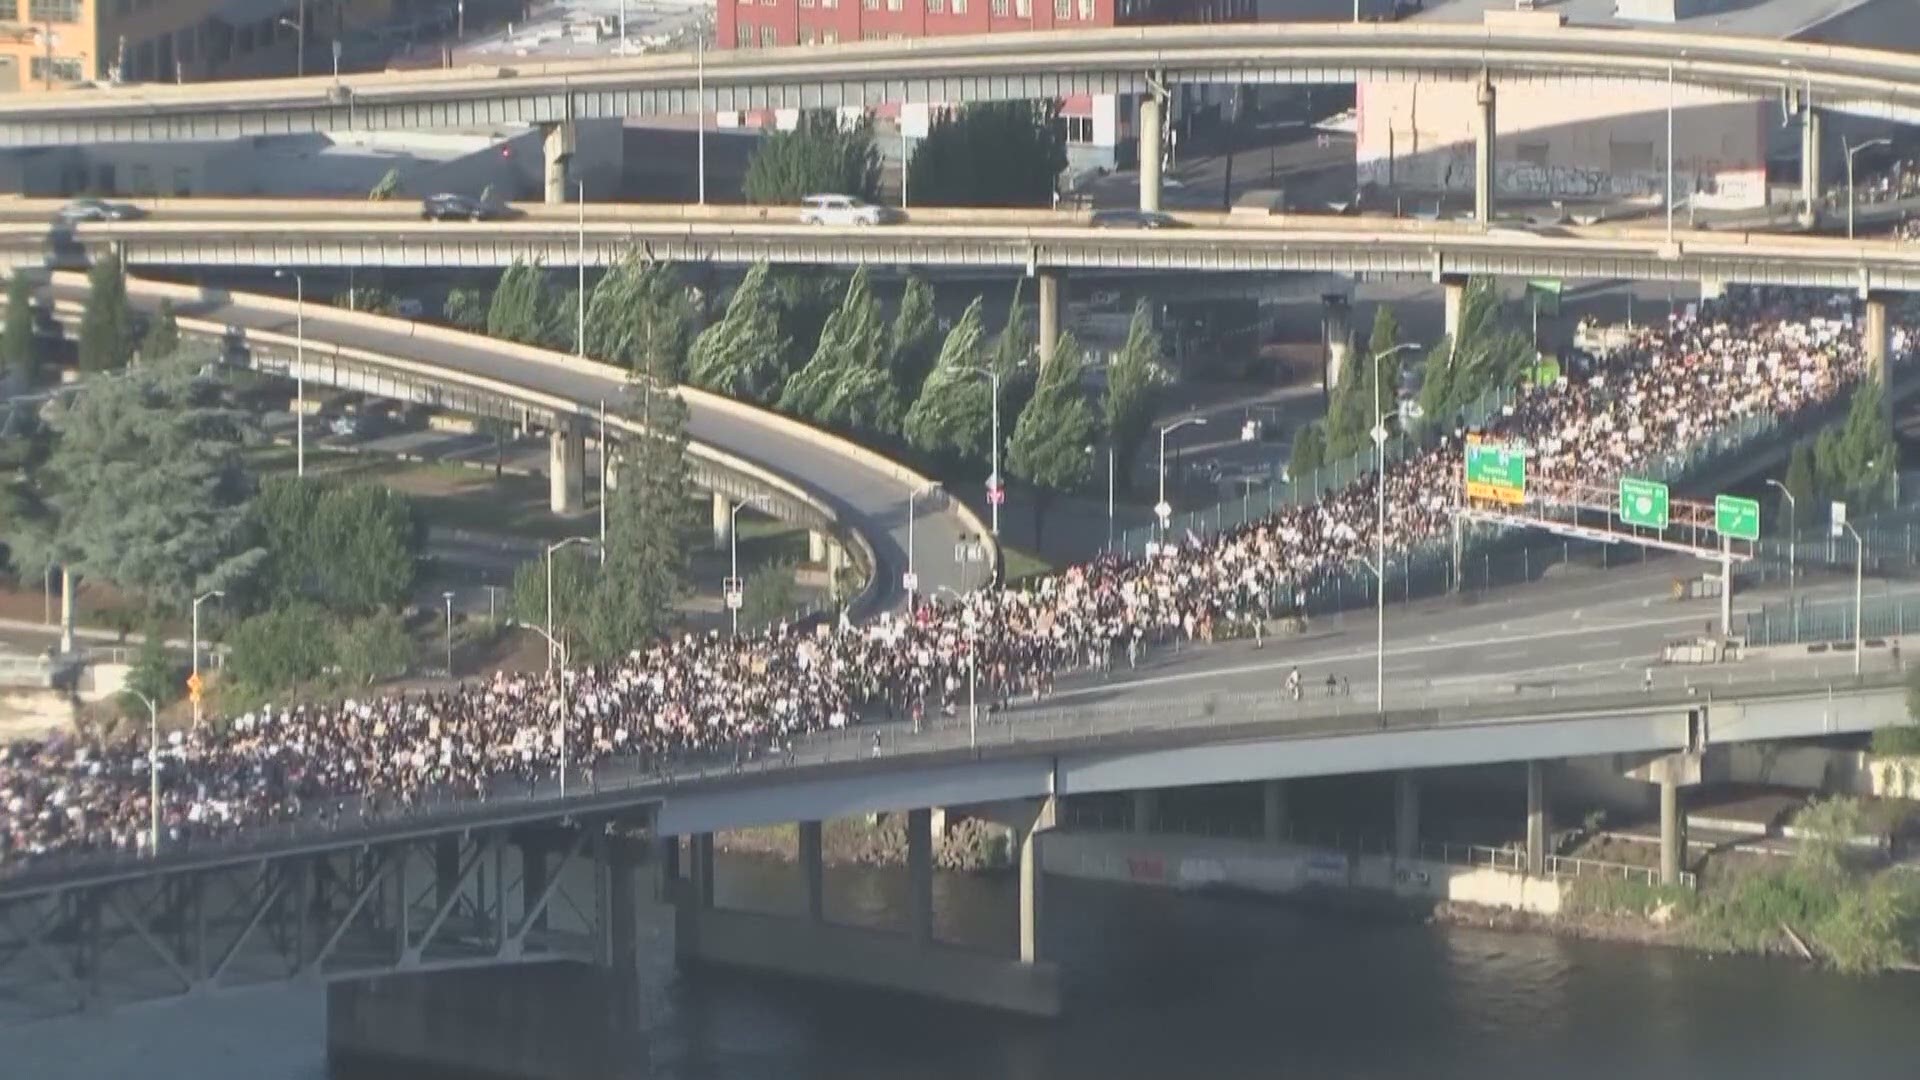 Thousands of protesters crossed the Morrison Bridge on Day 6 of demonstrations against police brutality. Here's a time lapse of the view from our downtown sky cam.